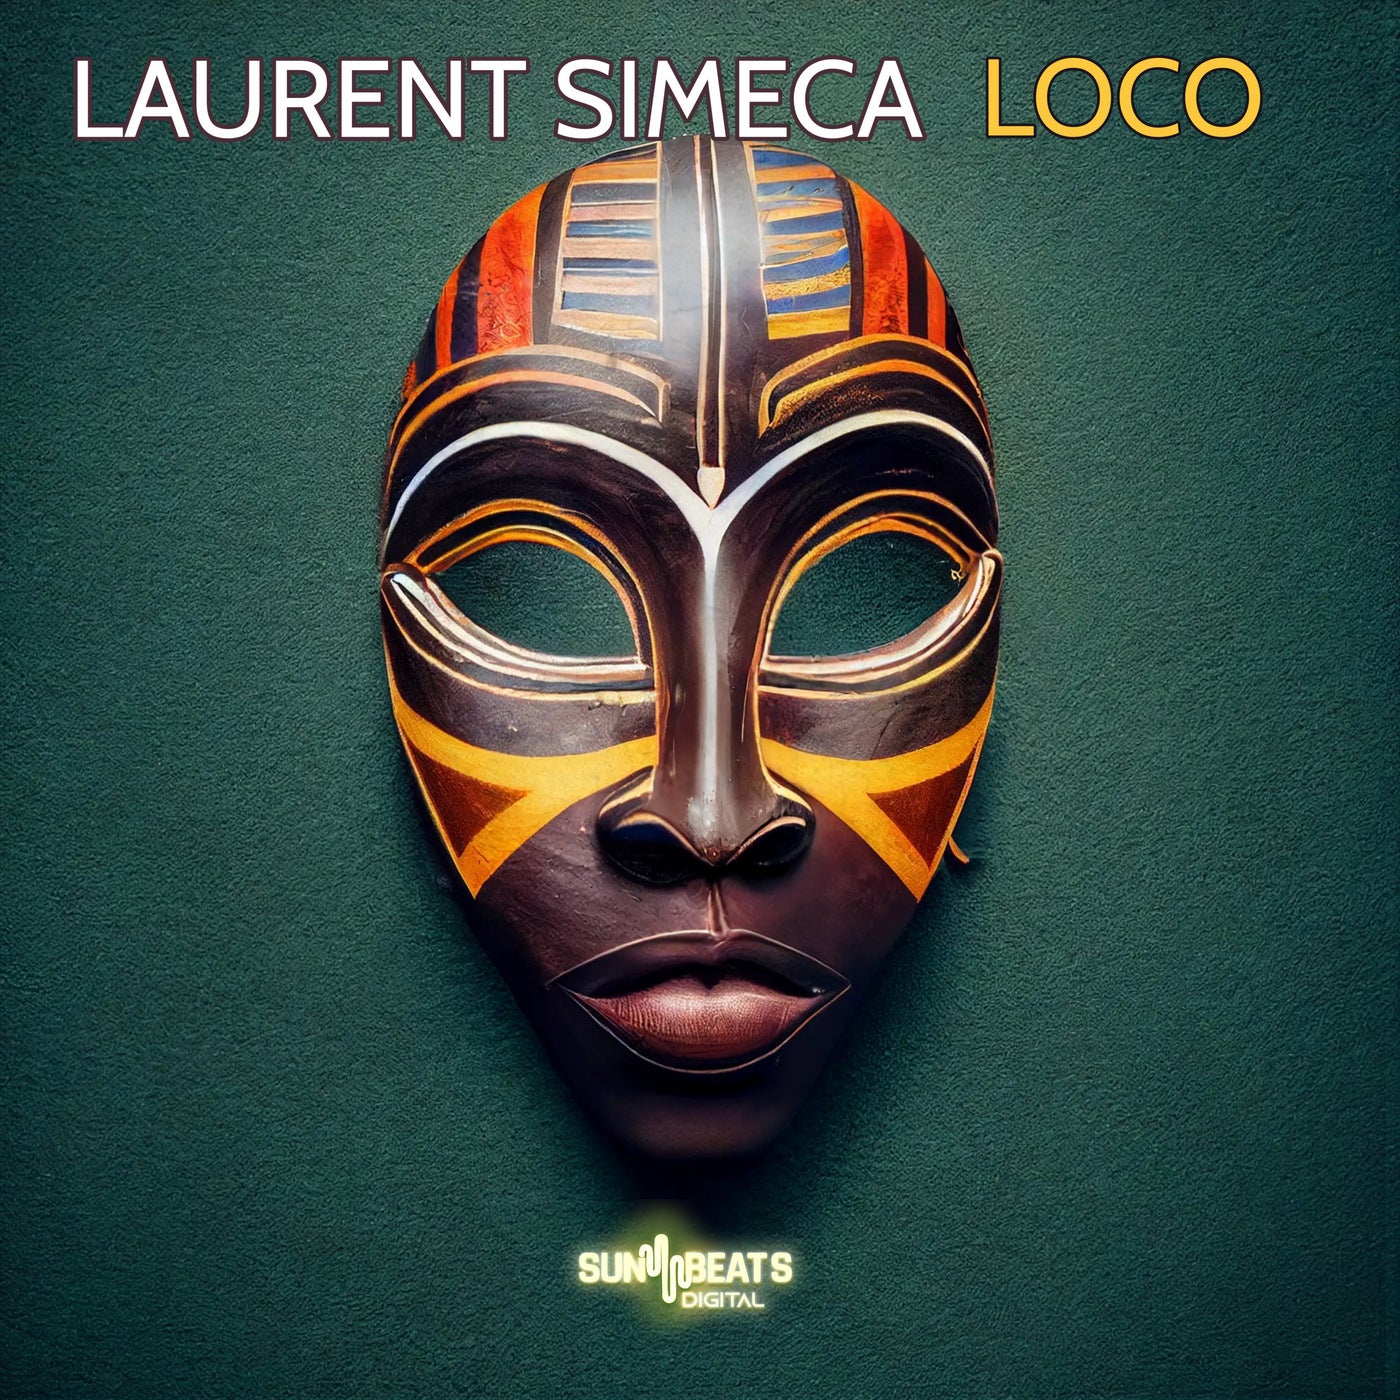 Release Cover: Loco Download Free on Electrobuzz